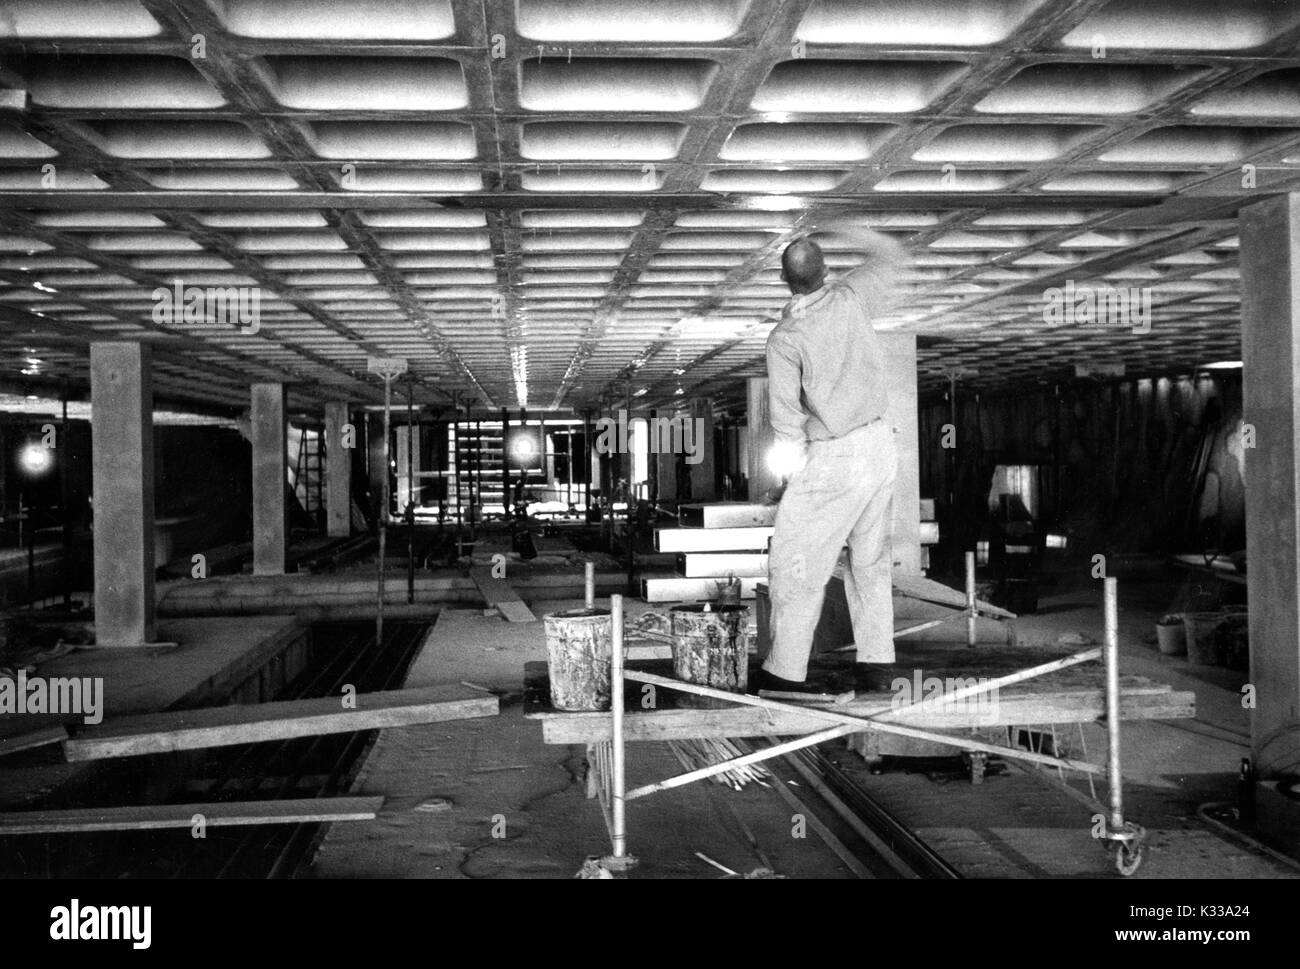 During the early stages of construction of the Milton S Eisenhower Library at Johns Hopkins University, a construction worker wearing a uniform stands on a platformn with his back turned inside an unfinished M Level, painting glaze onto the beams of the ceiling, with beams and wooden boards scattered around the inside of the building, and a courtyard visible in the distance with sunlight pouring in from the terrace level, Baltimore, Maryland, November 13, 1963. Stock Photo